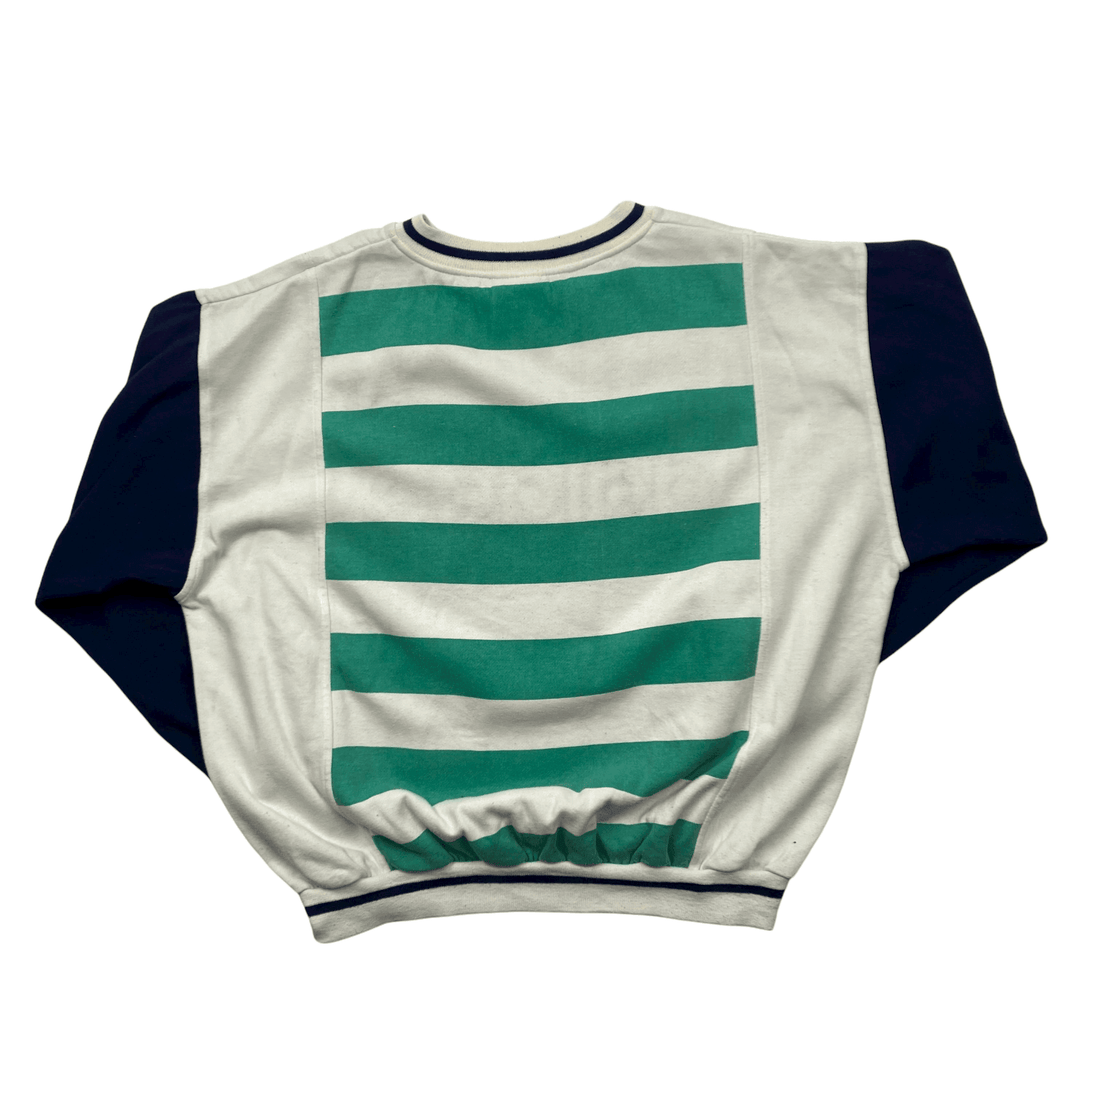 Vintage 90s Blue, Green + White Adidas Spell-Out Sweatshirt - Large - The Streetwear Studio